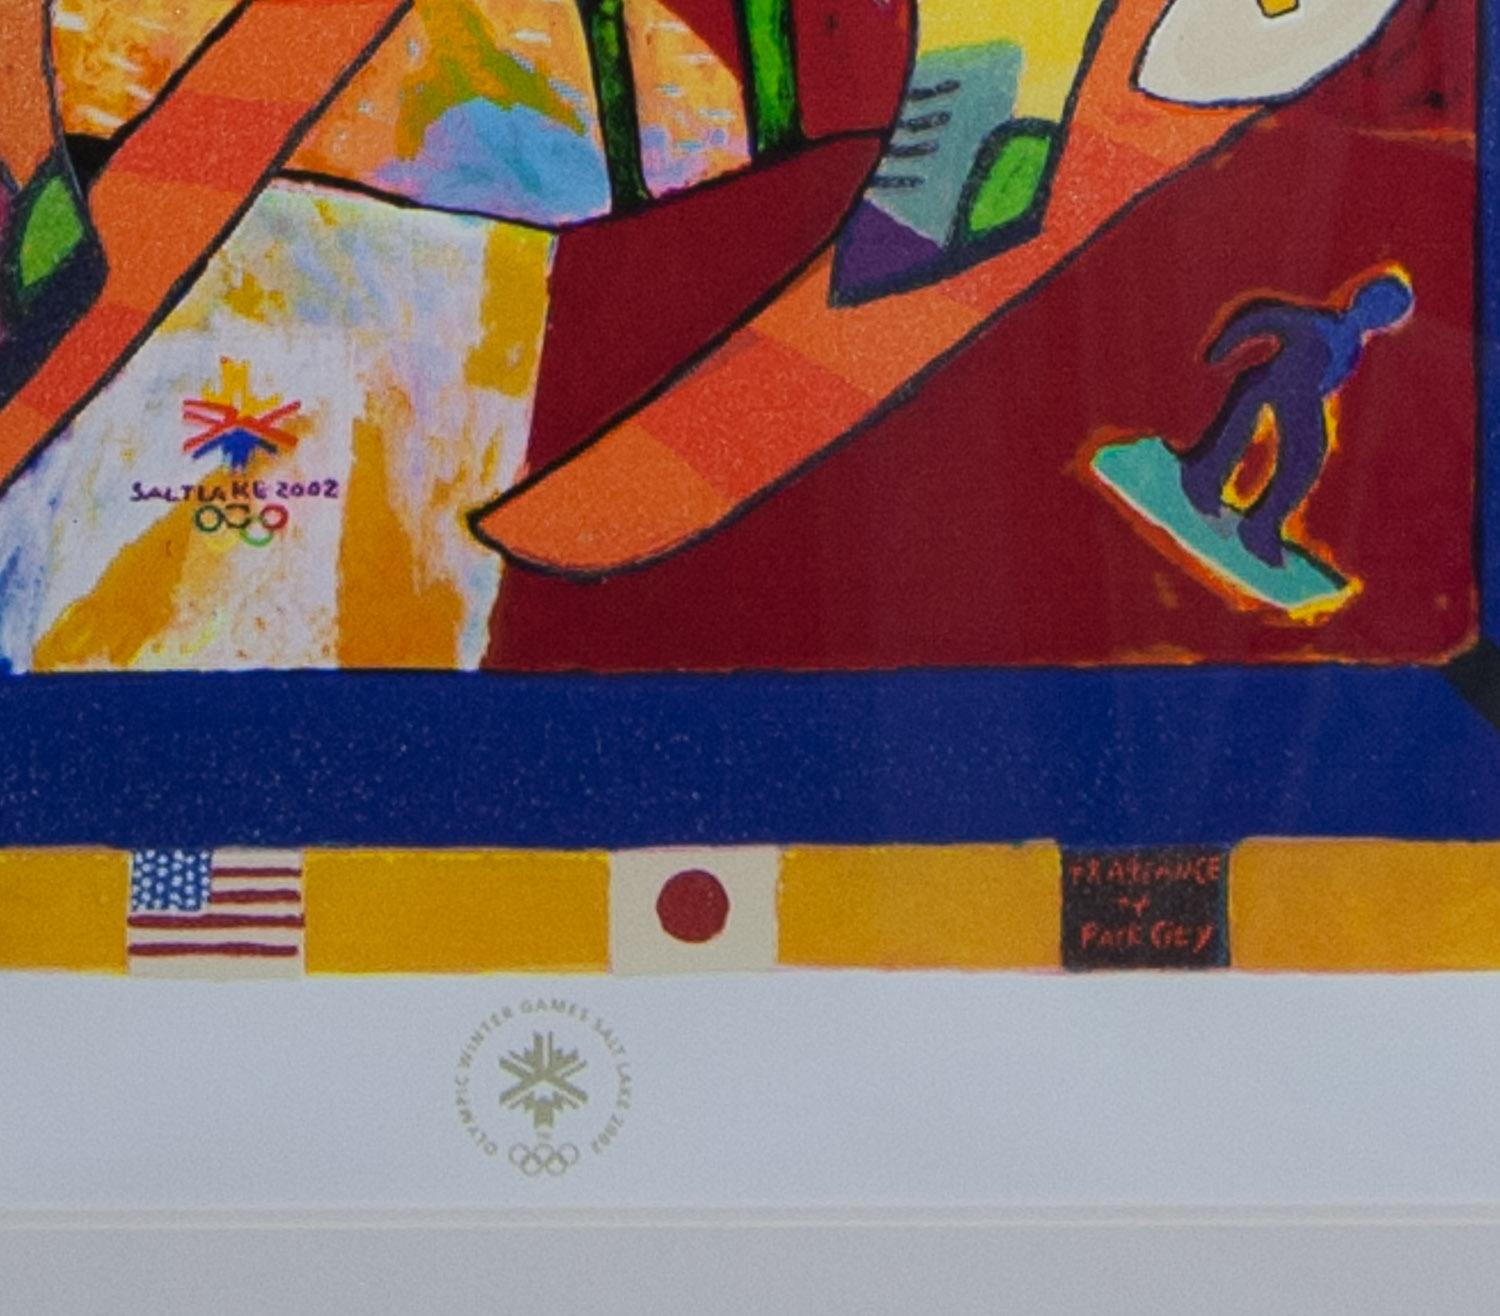      The Fragrance of Park City by the Dutch Pop artist Clemens Briels  is an original limited edition no. 195/200 3D serigraph with embossing and bears the official seal of the Olympic committee. It was the official painting for the Park City Utah